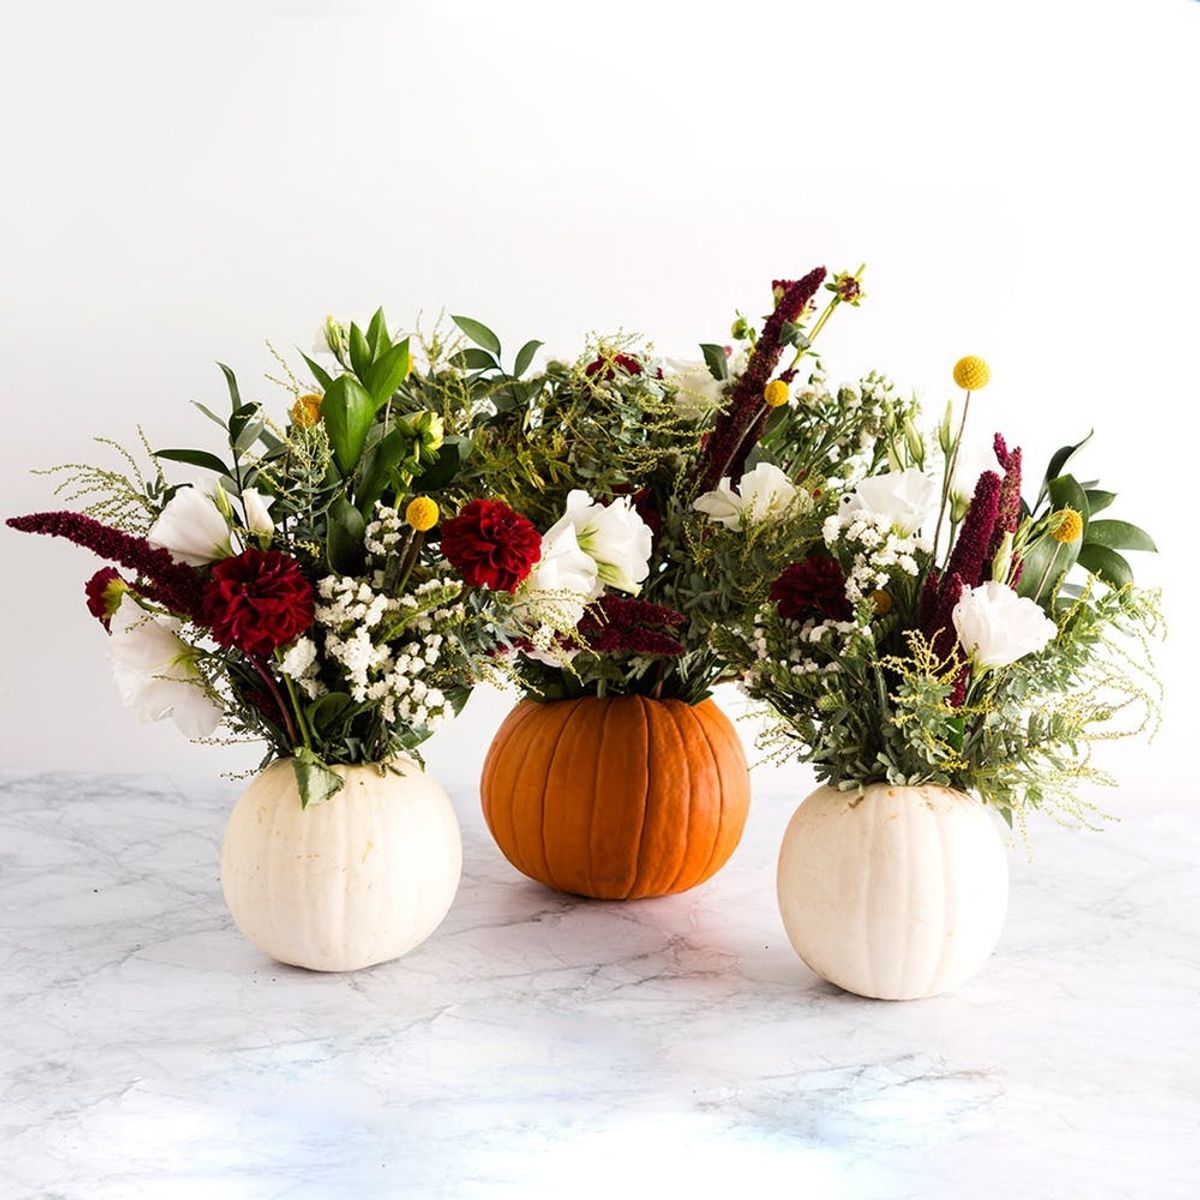 These Pumpkin Vases Are the Instagram-Worthy Thanksgiving Decor You’ve Been Looking For